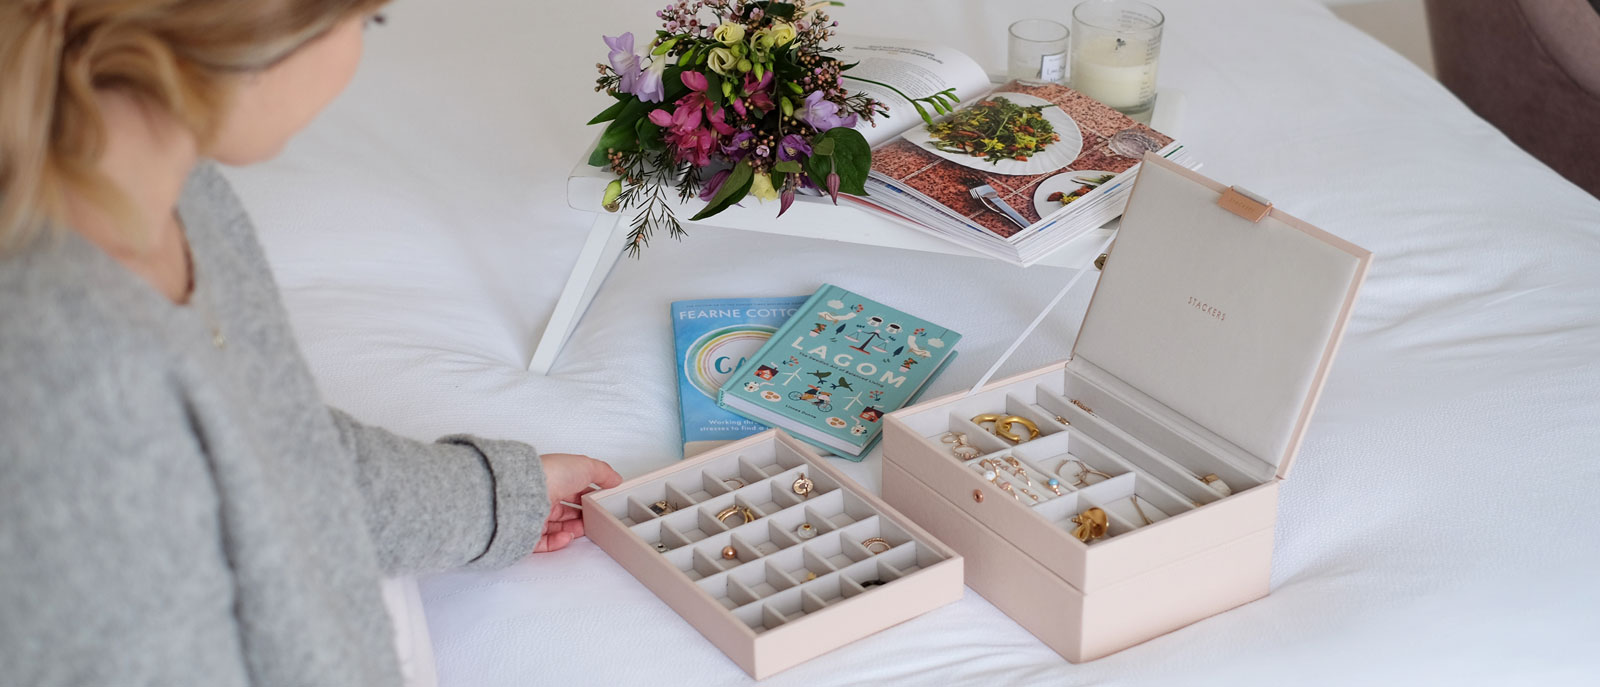 Woman sitting on bed looking at Stackers Jewellery Box